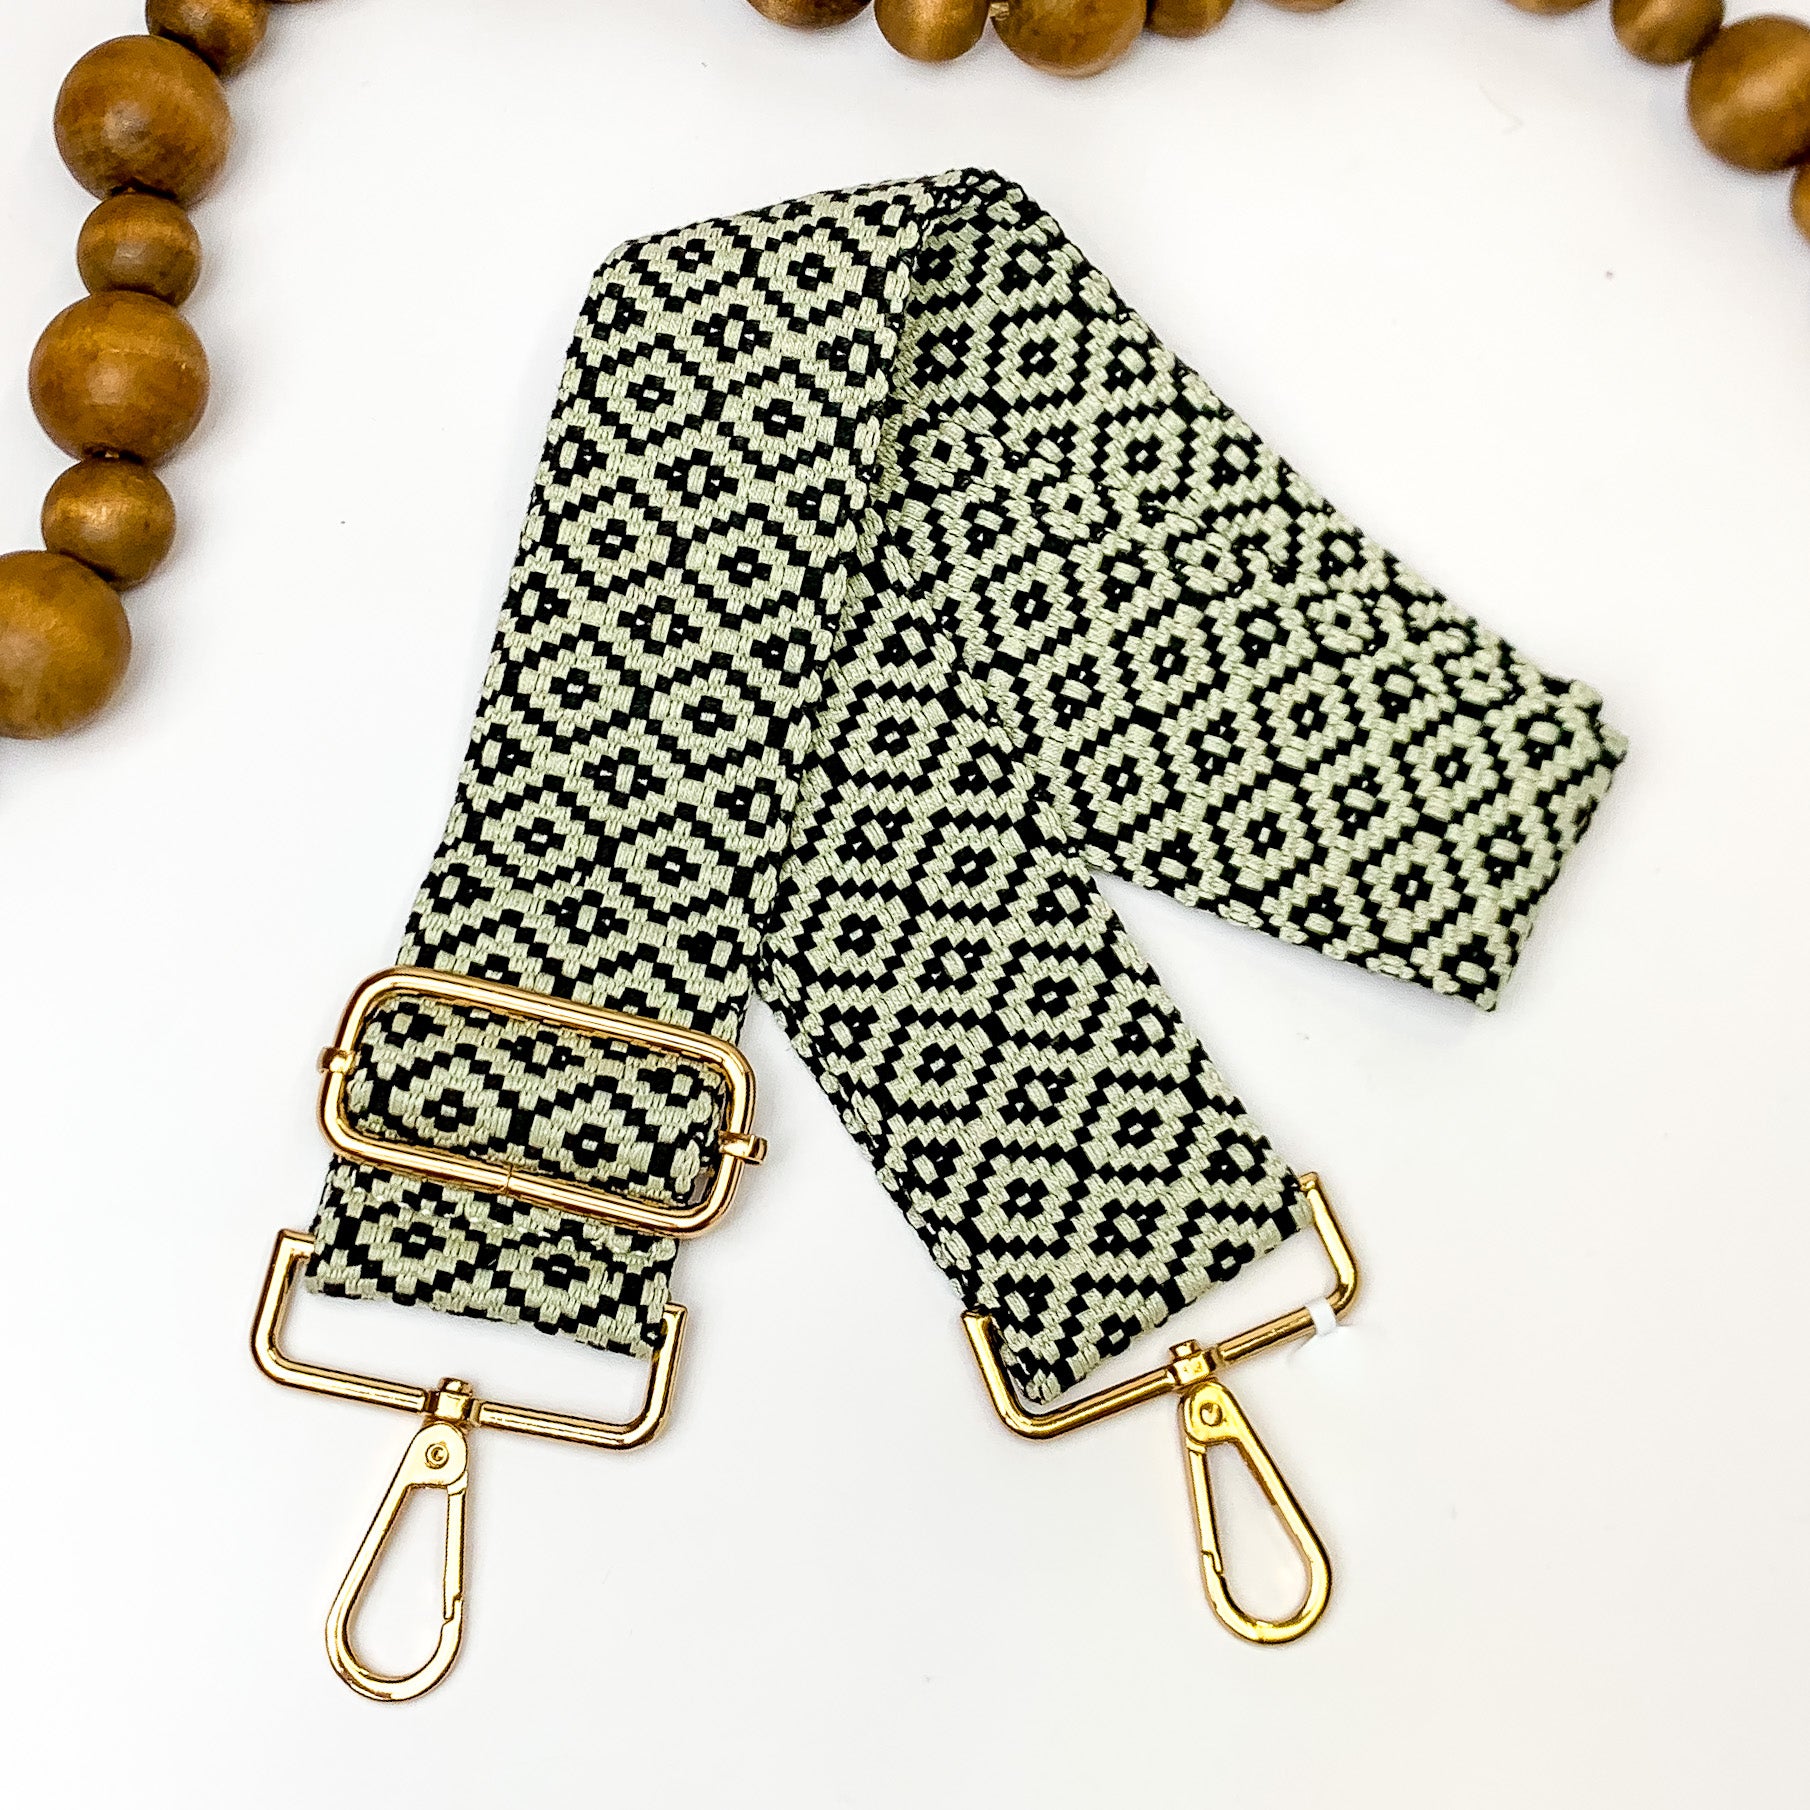 Beaige canvas purse strap with black diamond design. This purse strap includes gold accents. This purse strap is pictured on a white background with brown beads at the top.